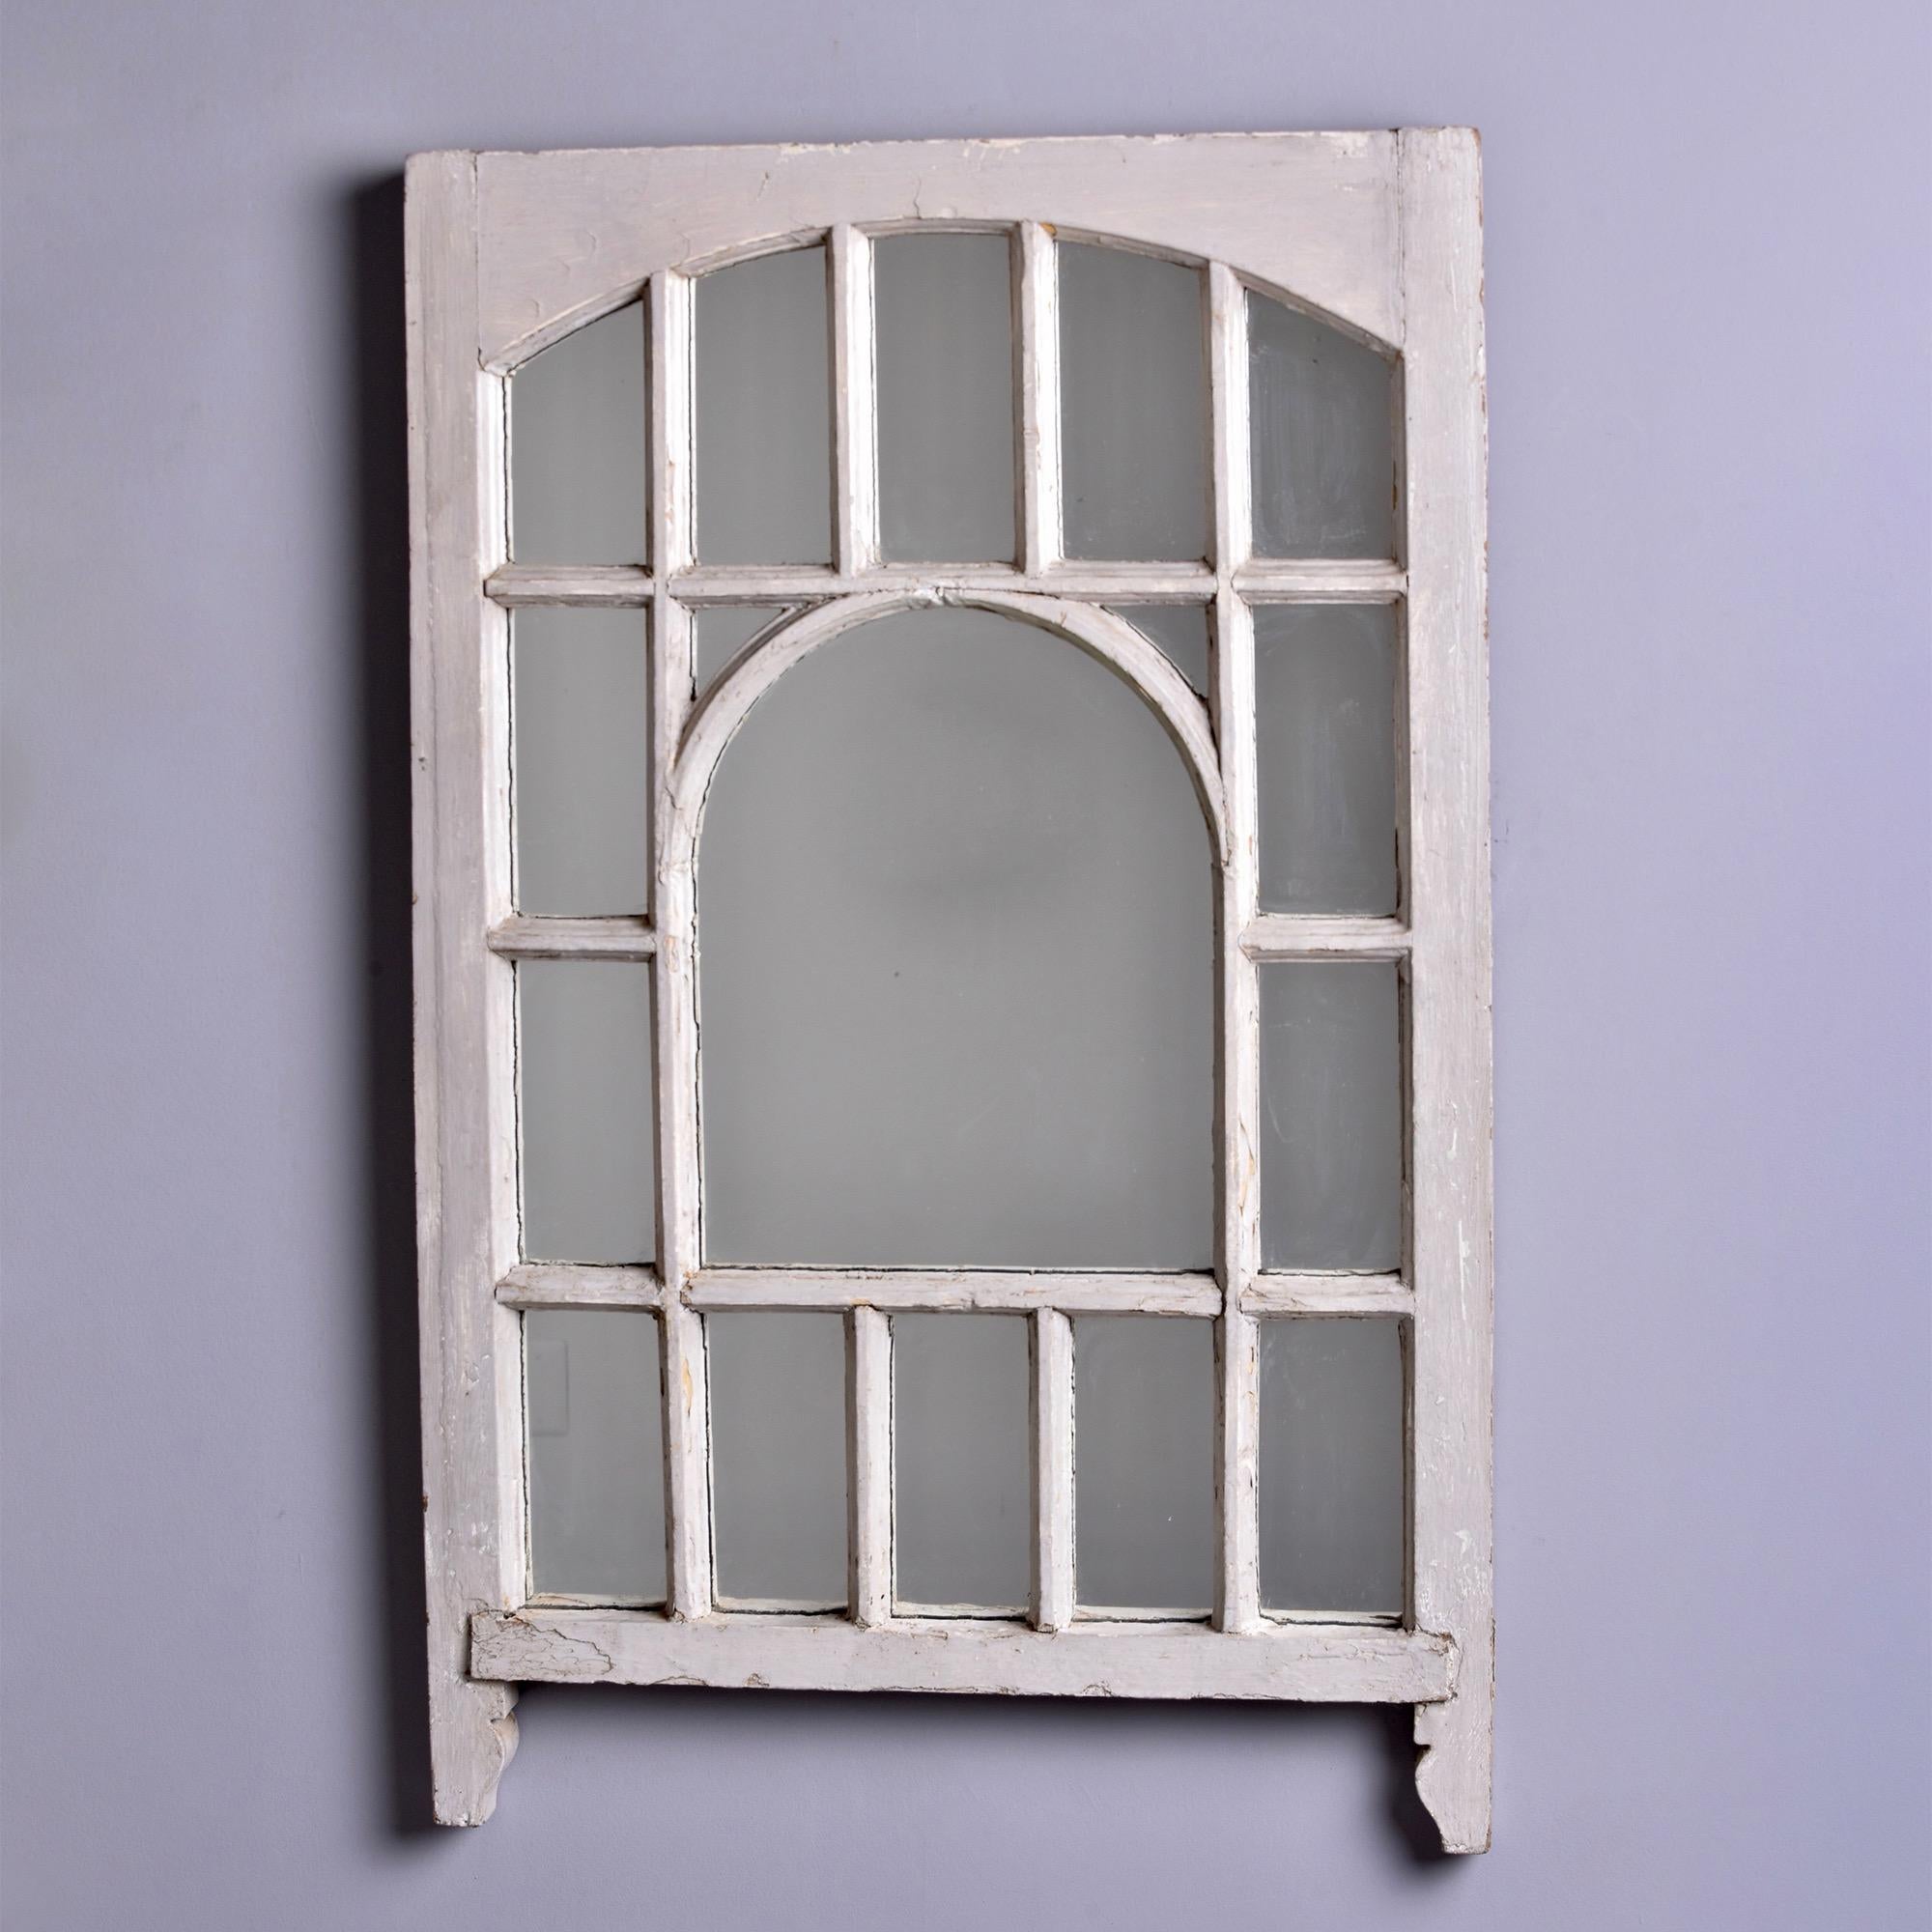 Early 20th C English White Painted Window Frame Mirror In Good Condition For Sale In Troy, MI